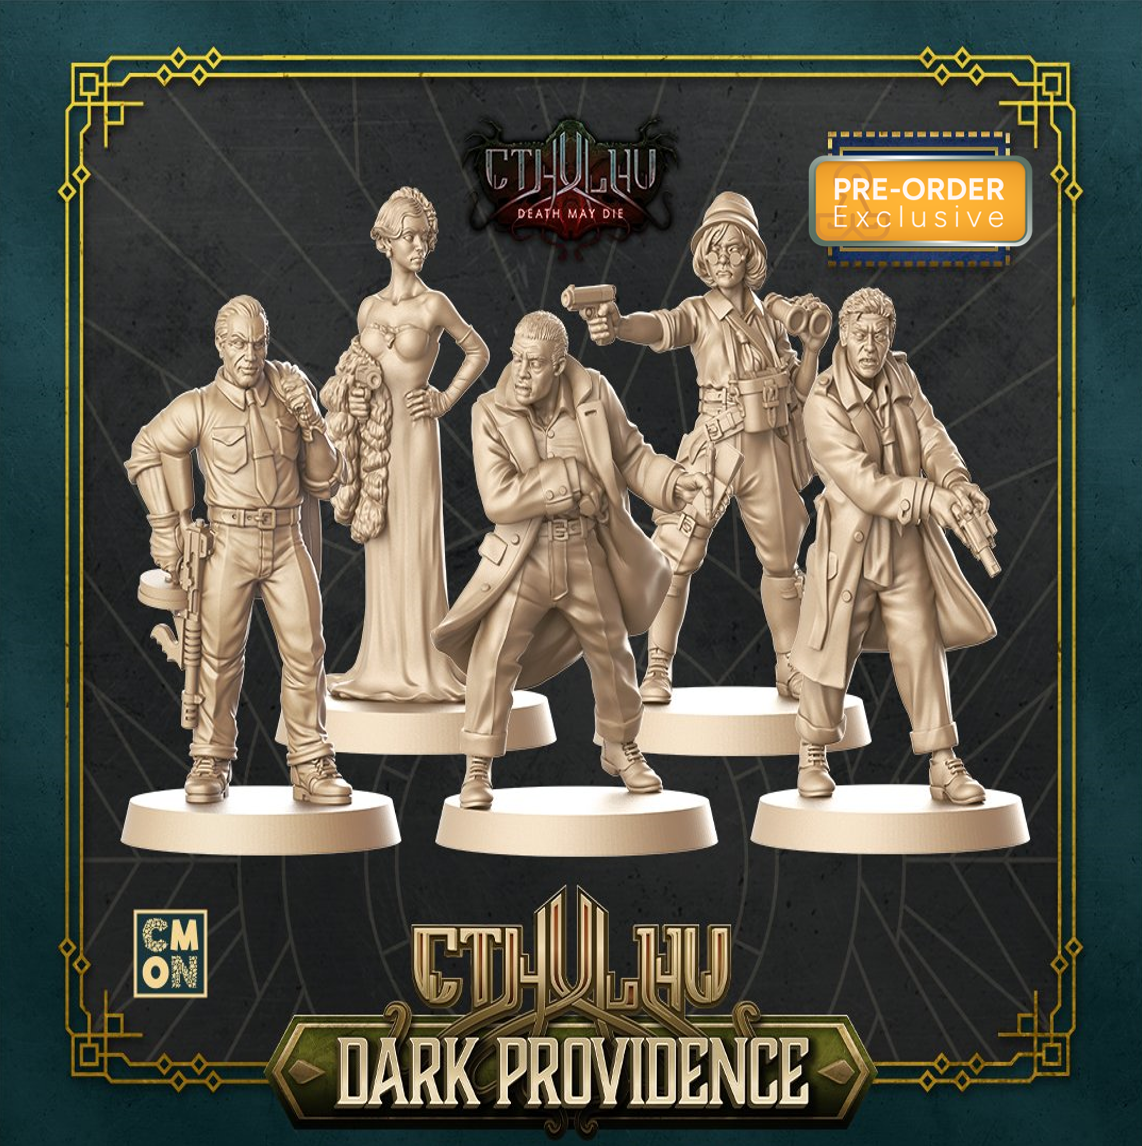 Exclusive Cthulhu: Death May Die Investigators From Cthulhu: Dark Providence Board Game